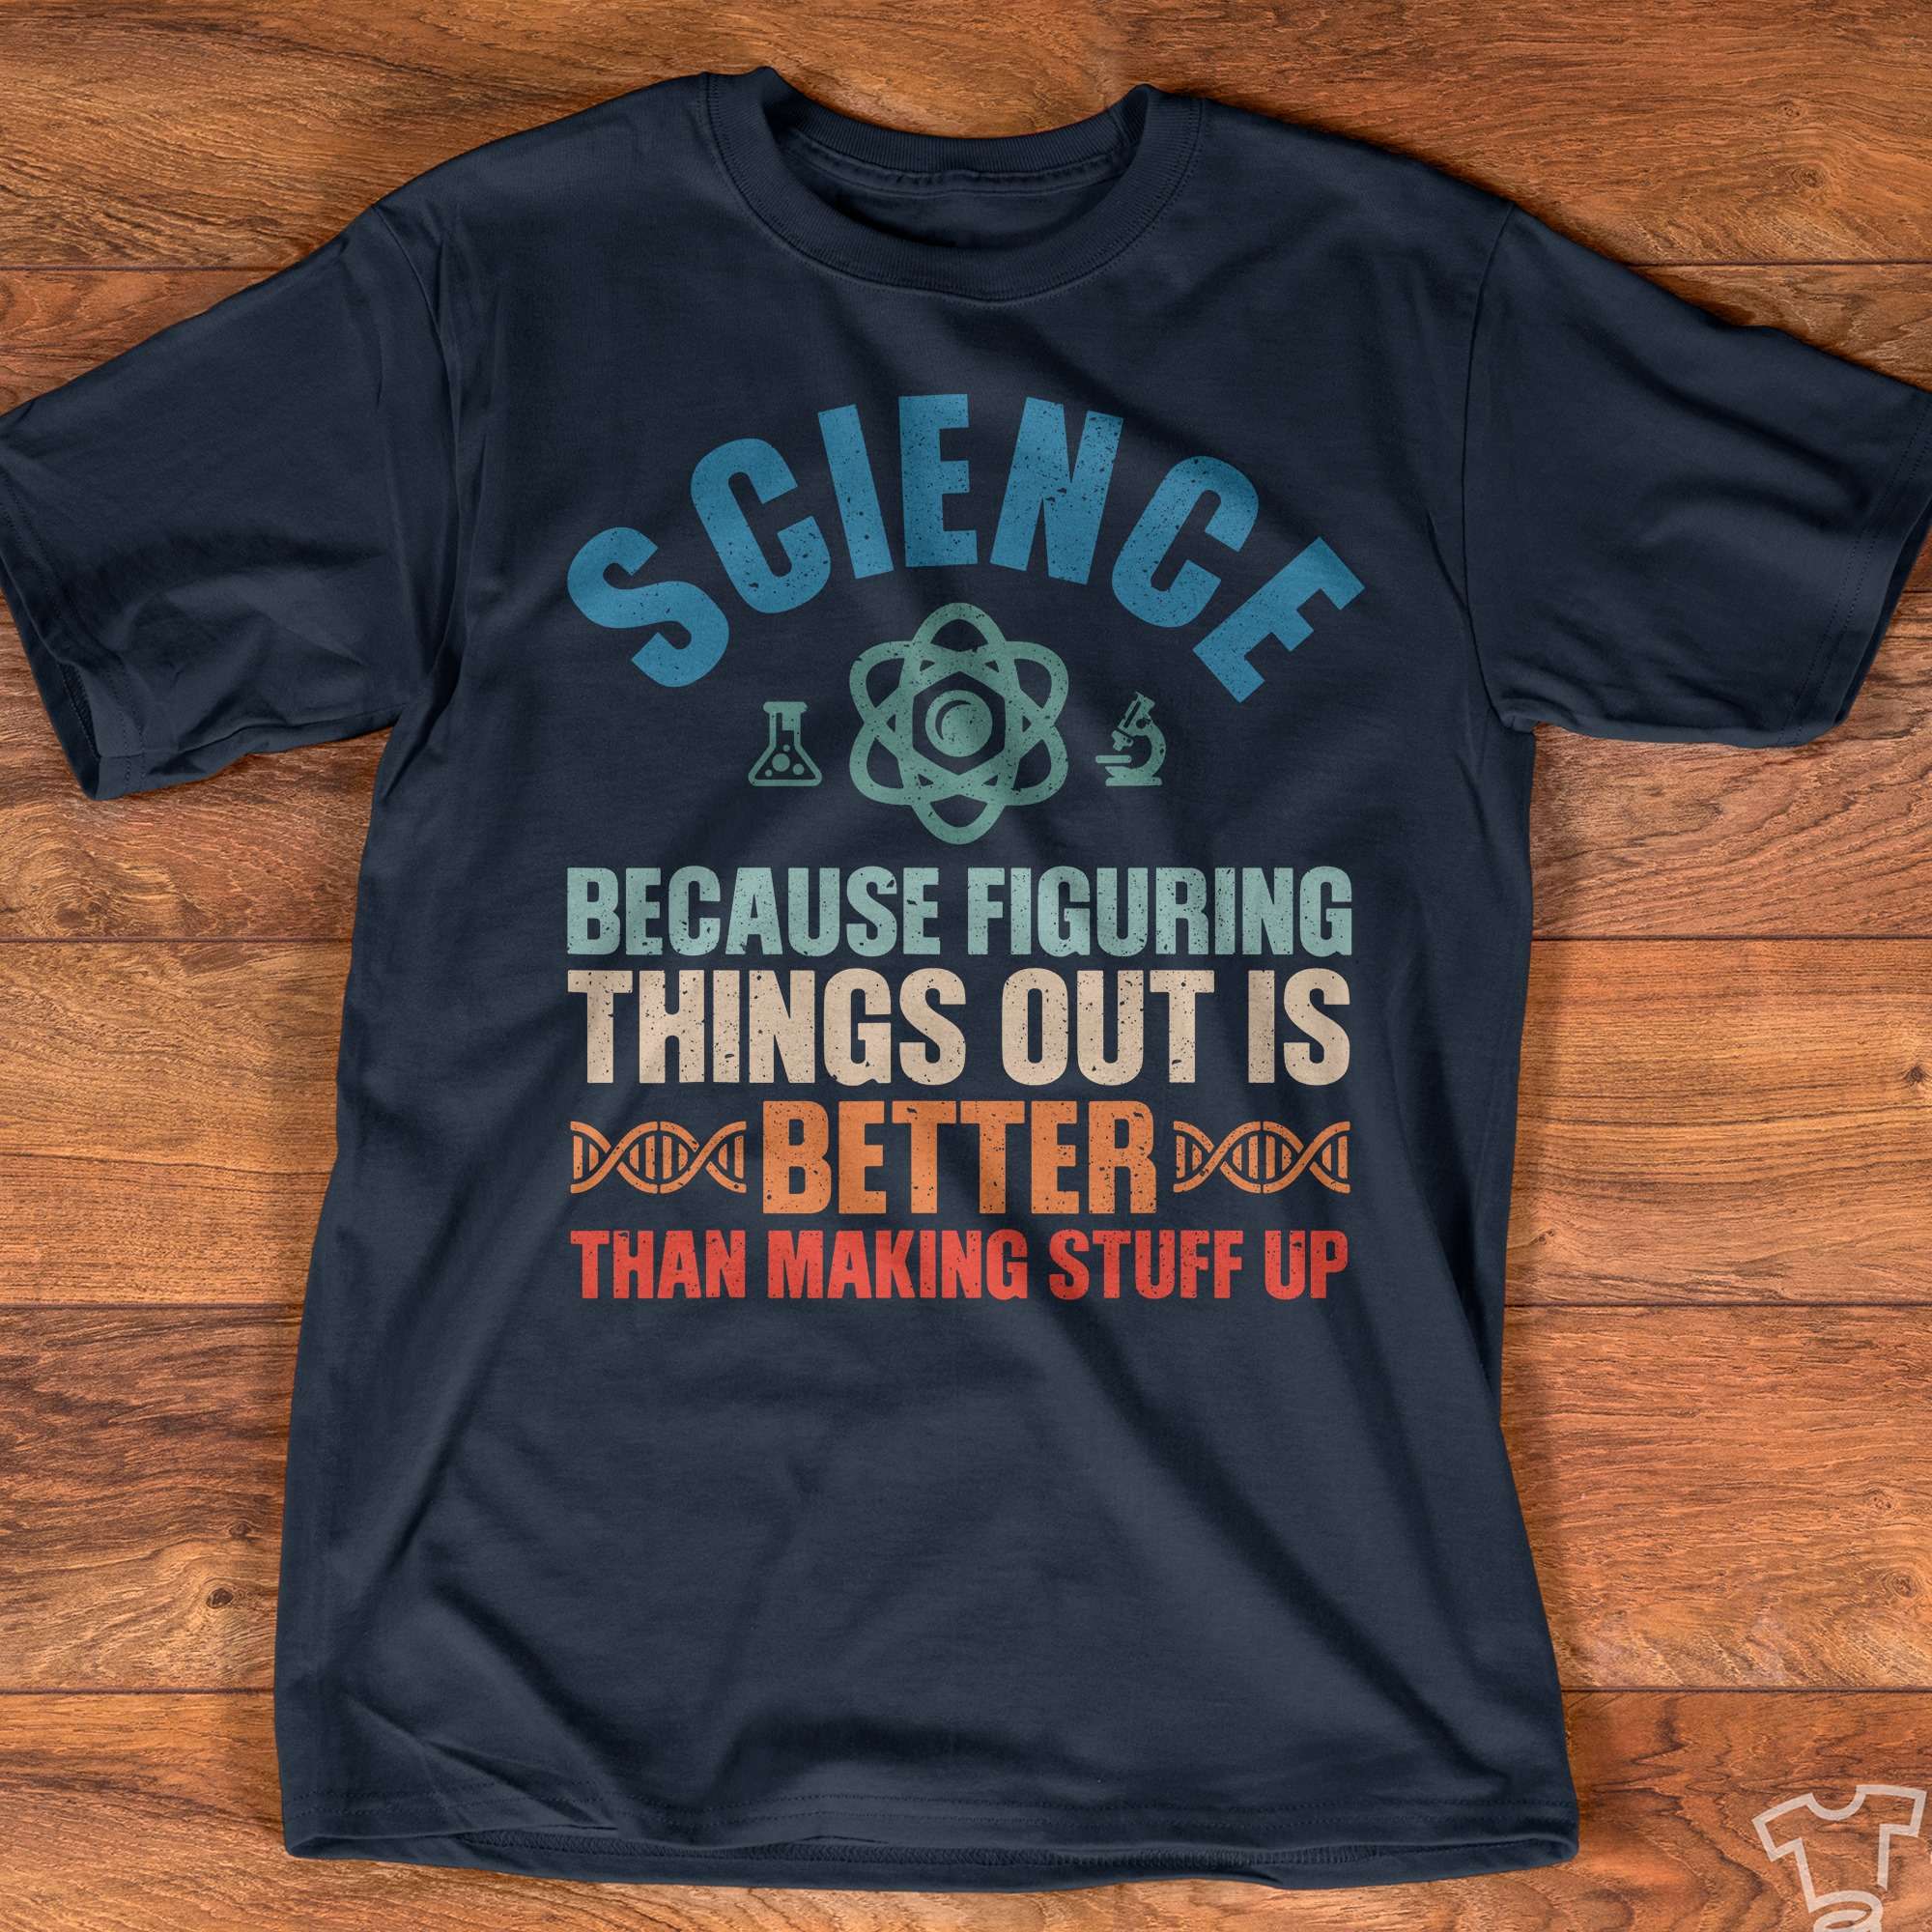 Science because figuring things out is better than making stuff up